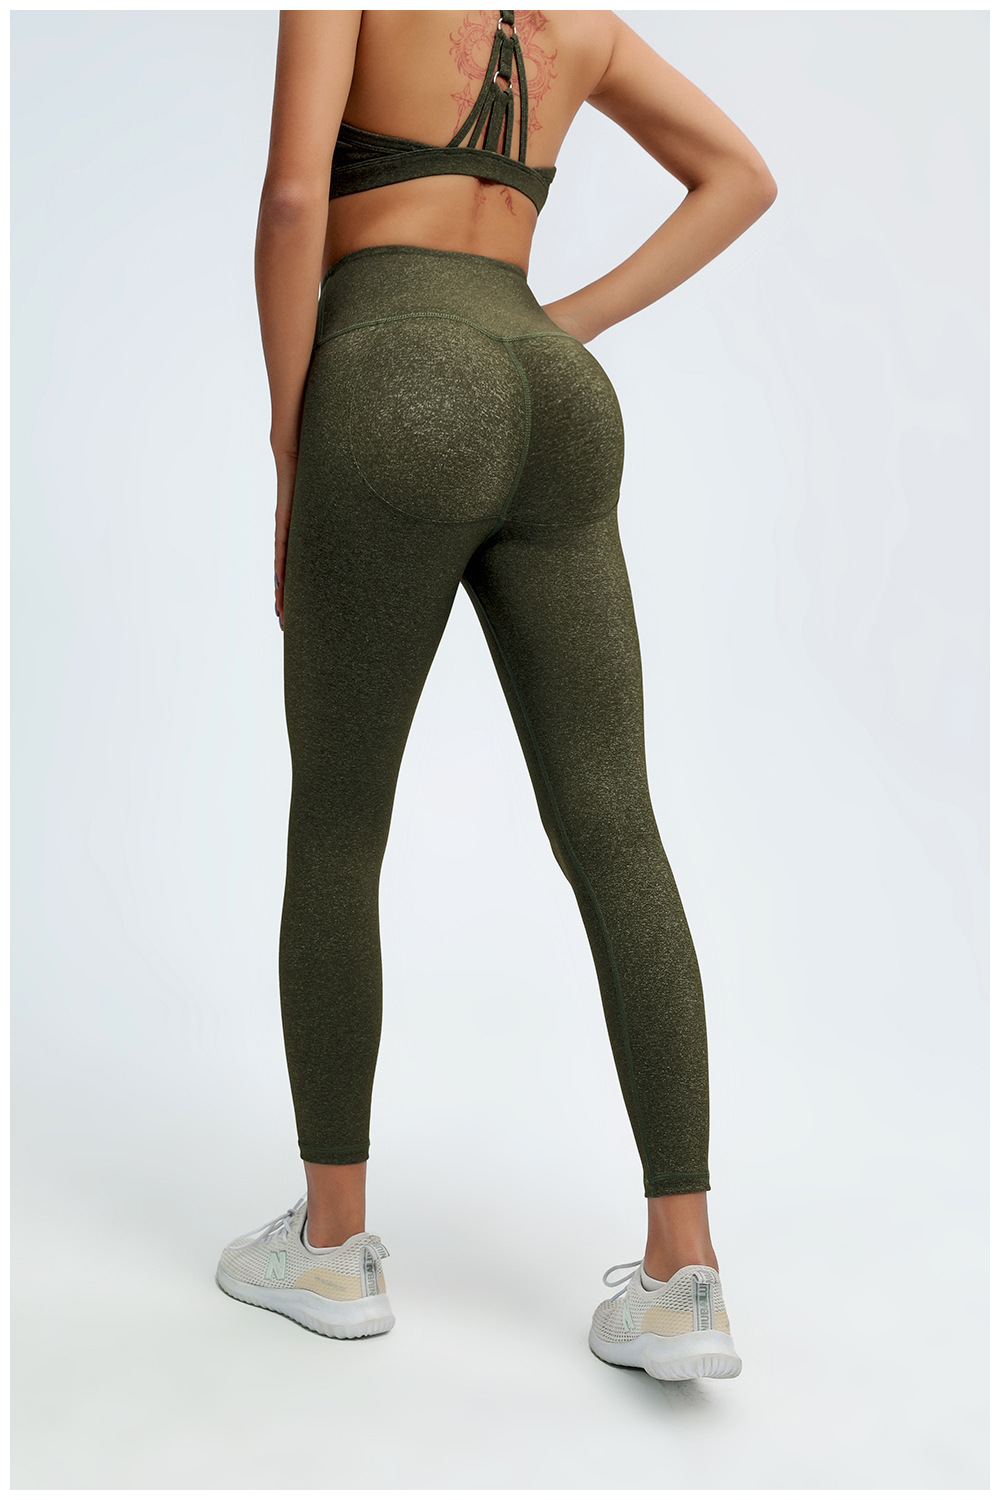 Y Workout Sea Breeze Set (Top and sexy control tummy leggings) – Genevieve  Gozum